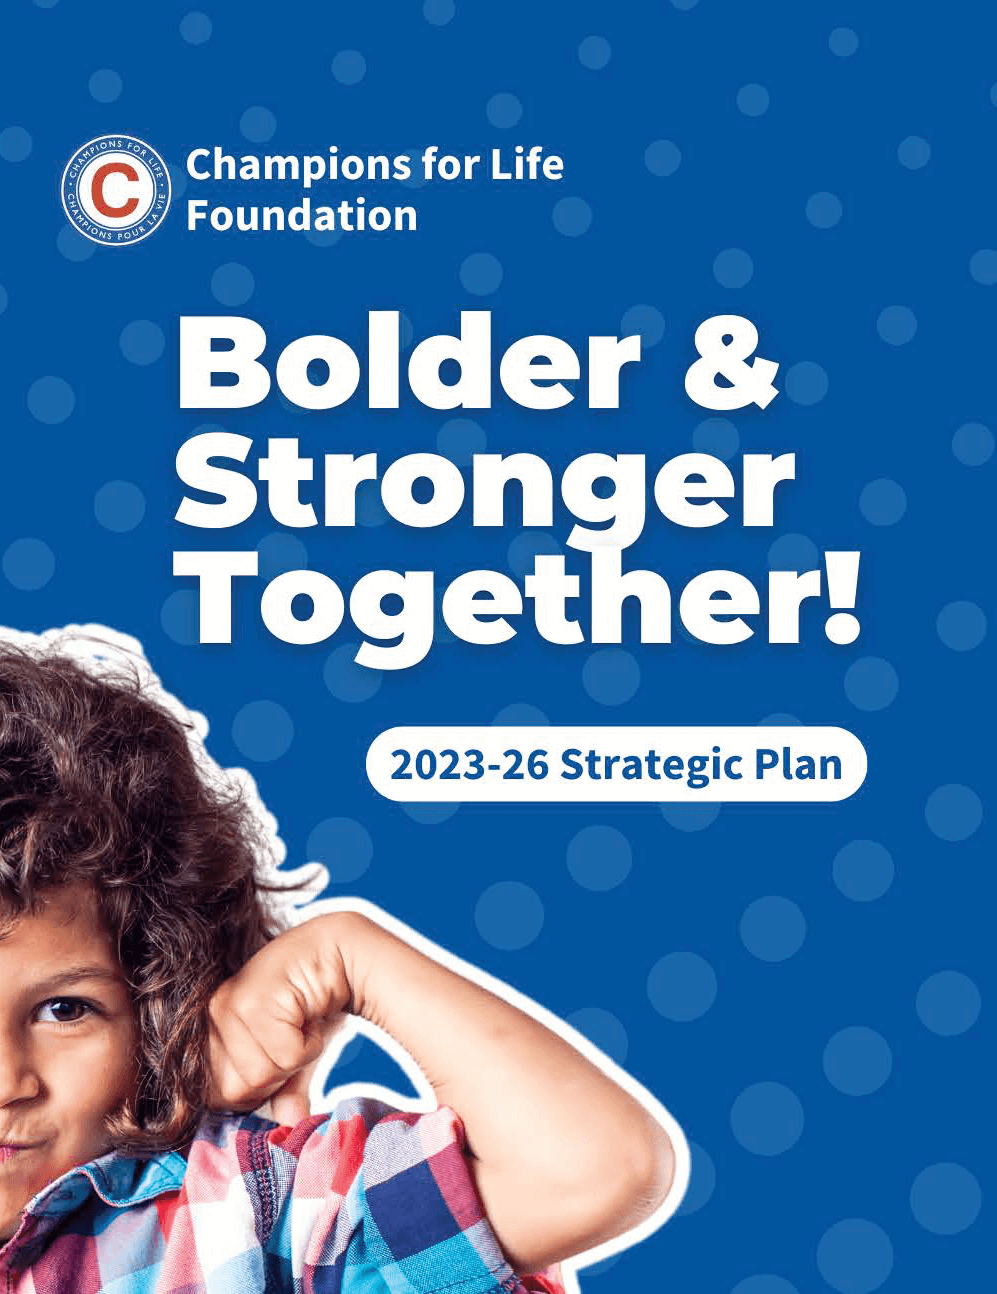 Bolder and Stronger Together. The Champions for Life Foundation is thrilled to unveil our 2023-26 strategic plan, a roadmap guiding our organization's journey over the next few years.